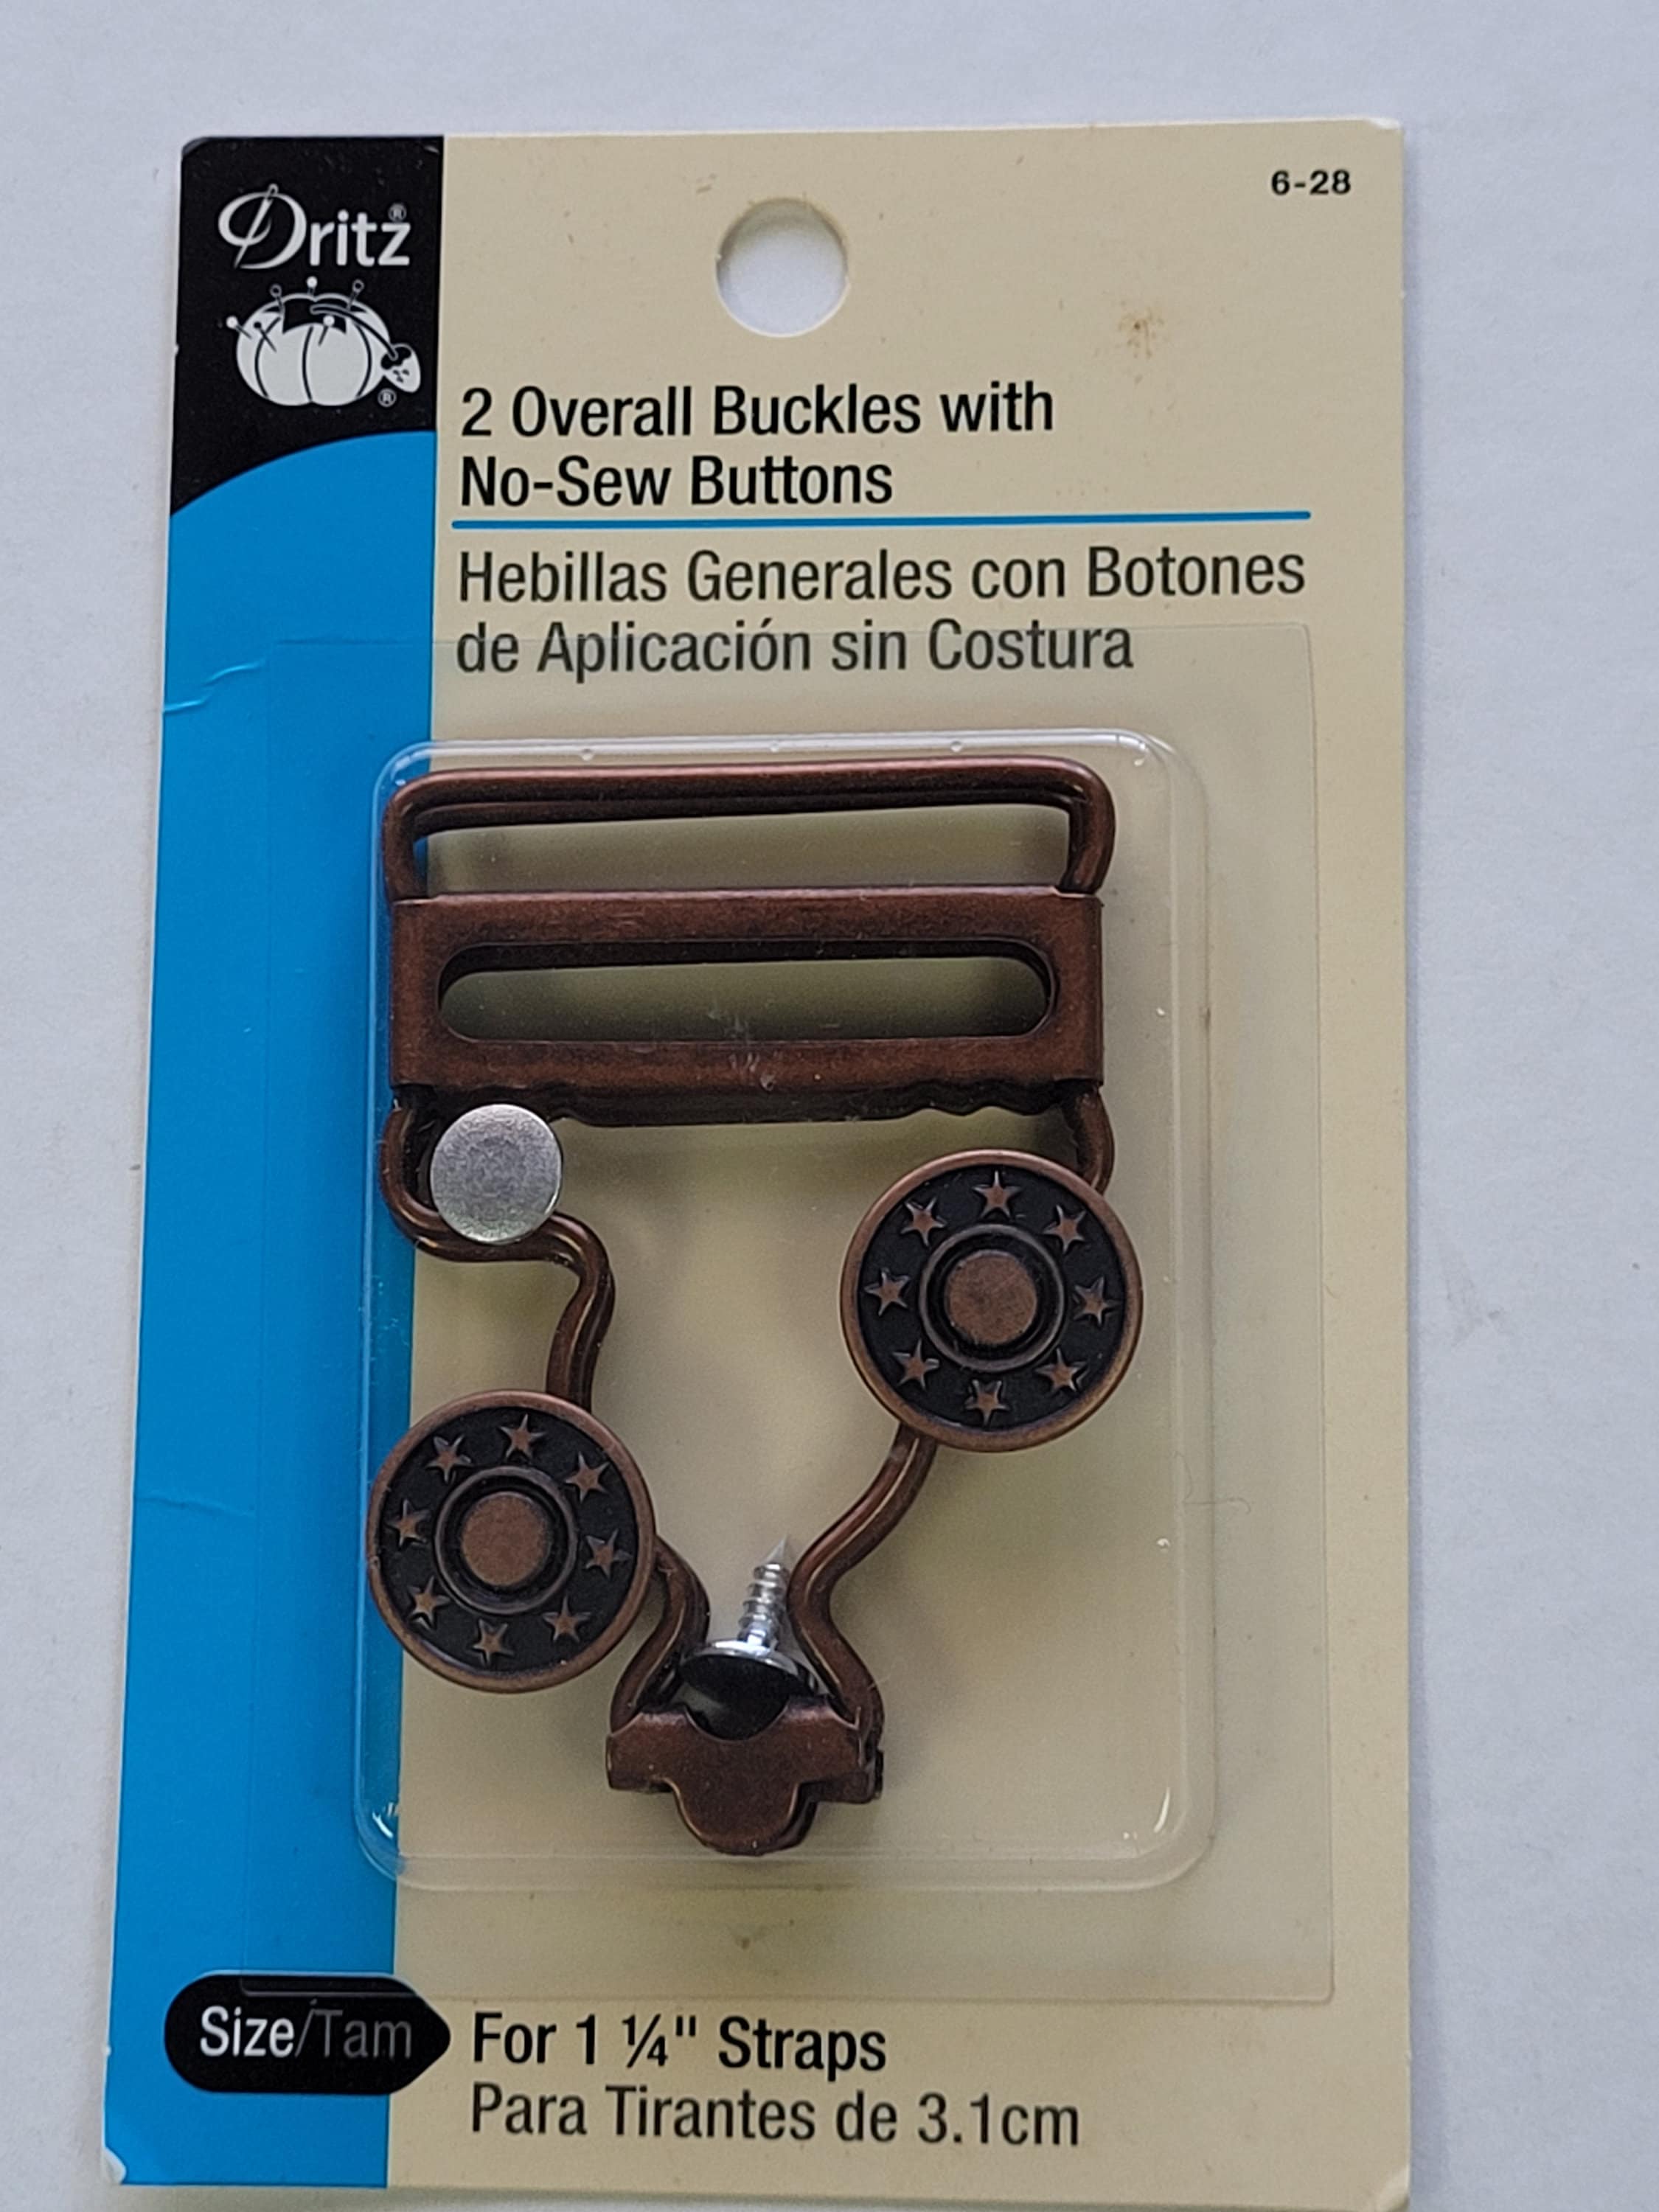 luvredford Dritz Overall Buckles 2 Square Belt Holders Sewing Craft